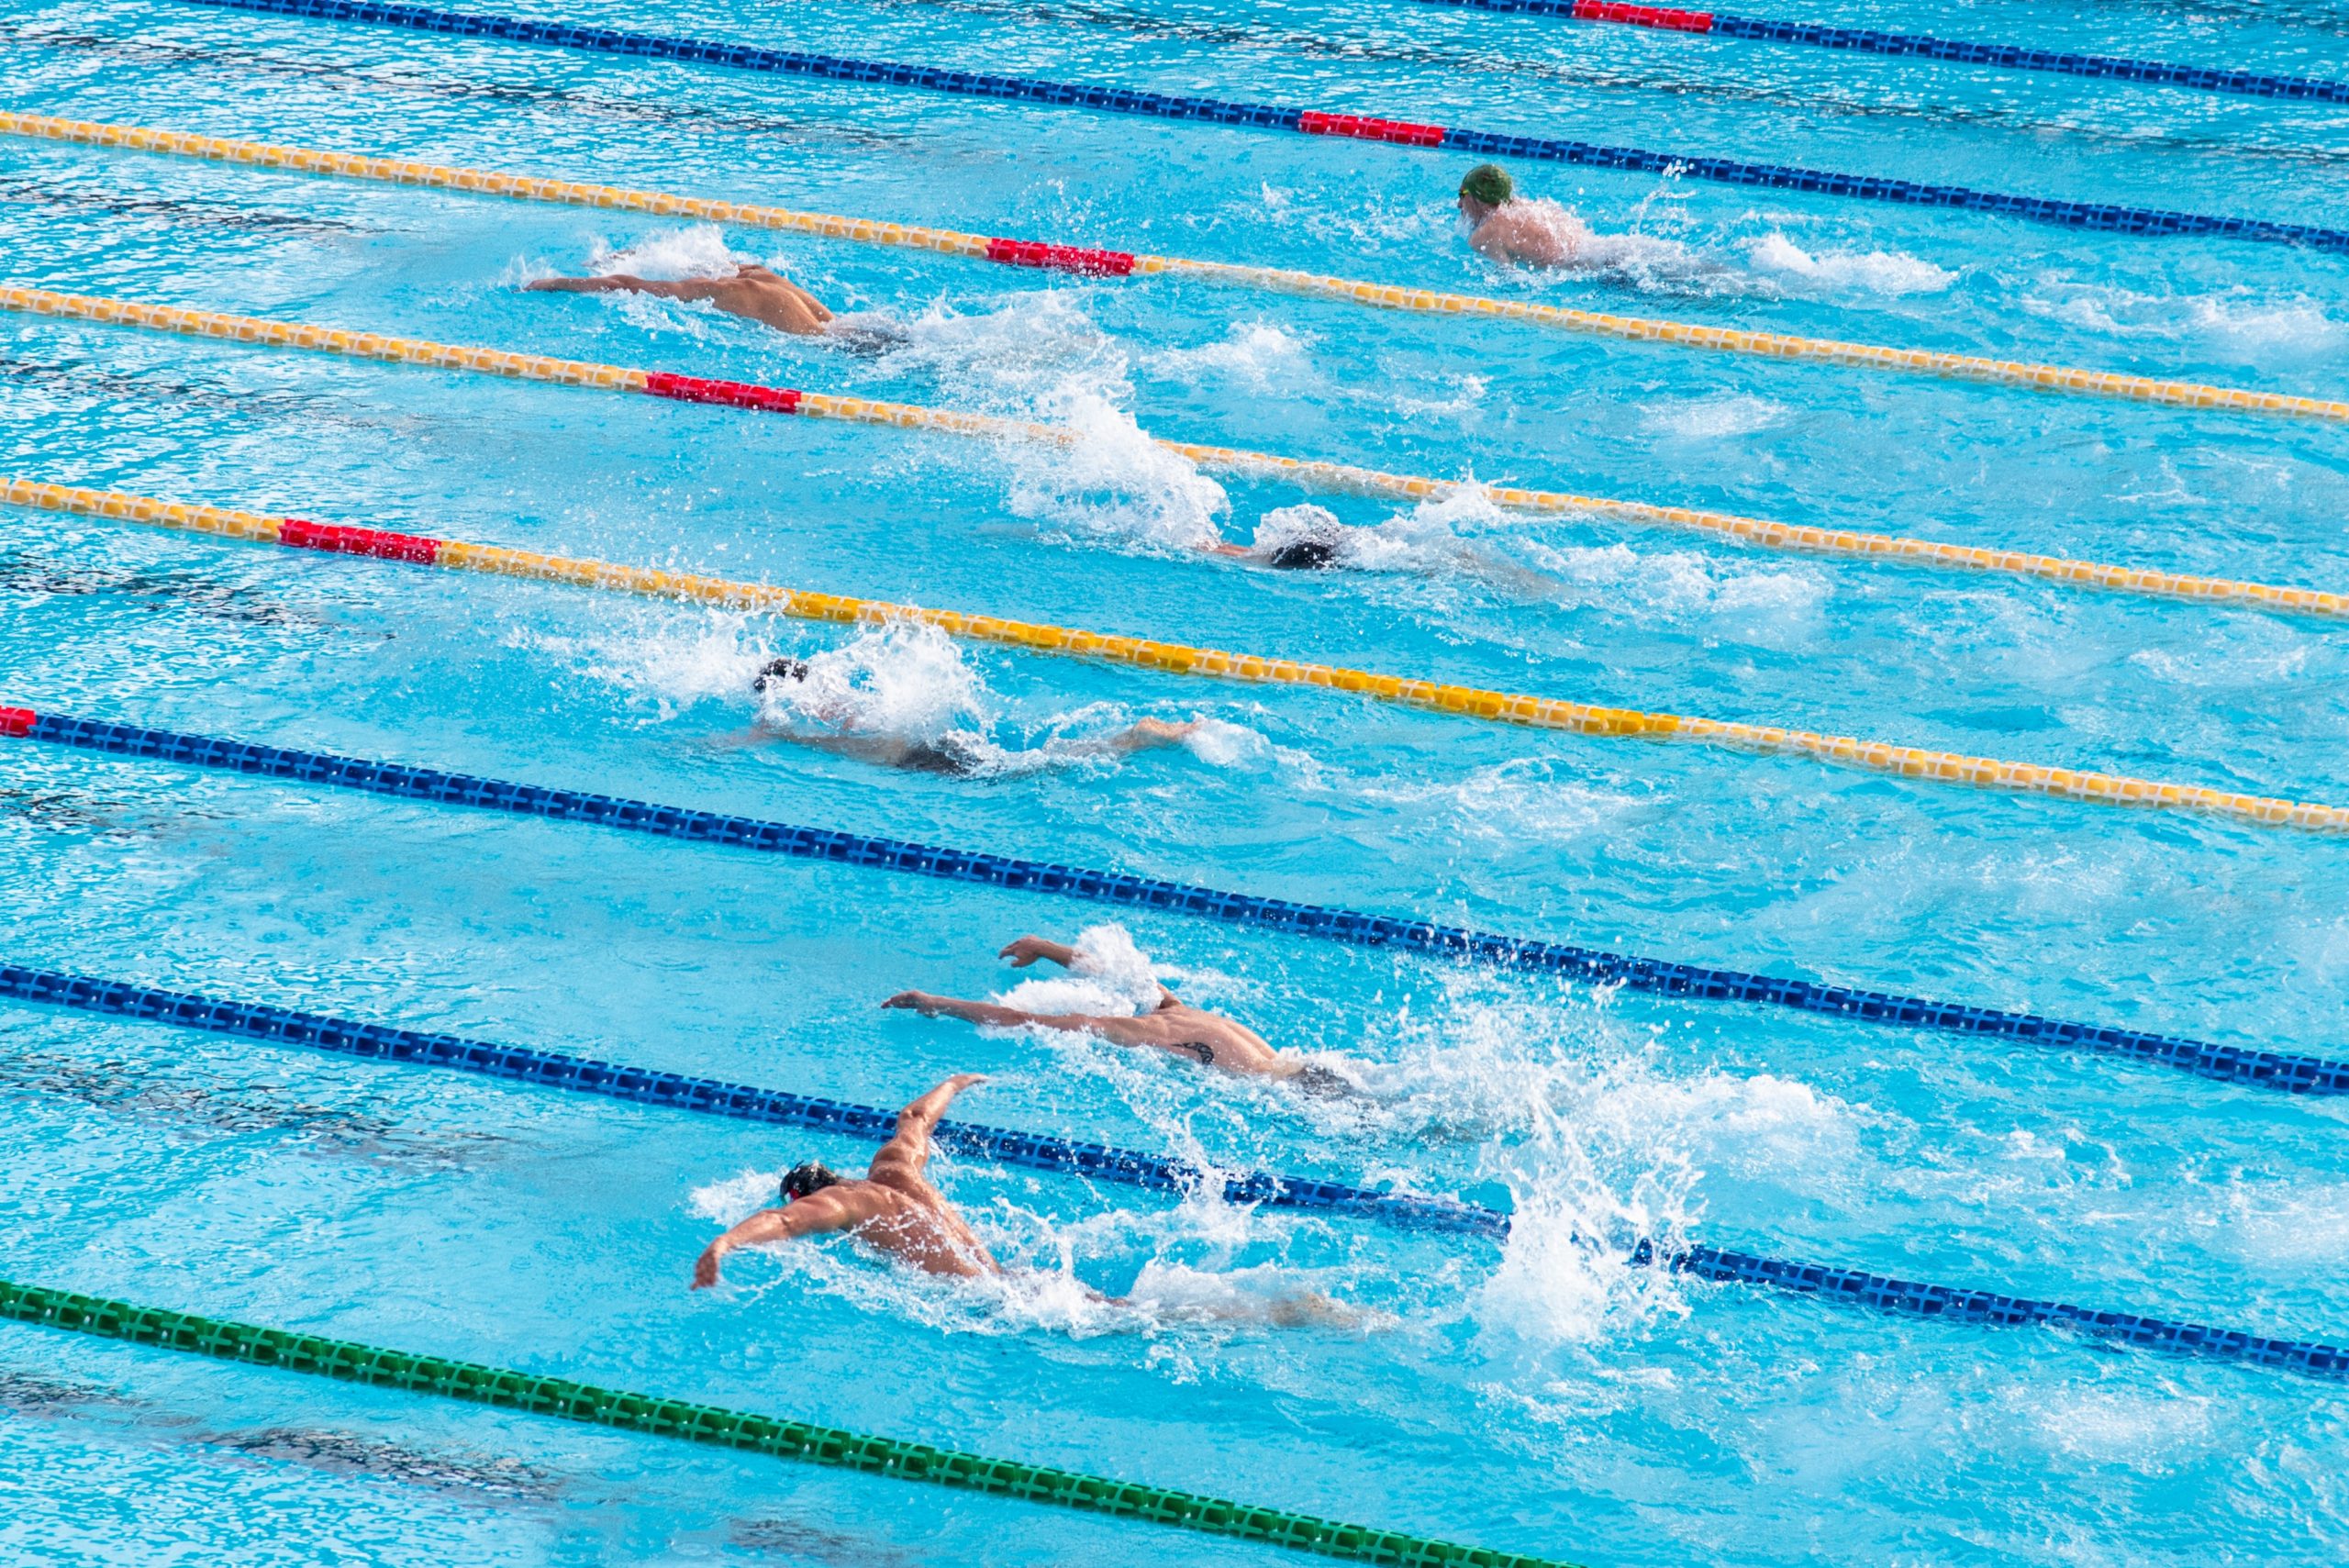 Swimming as an extracurricular activity